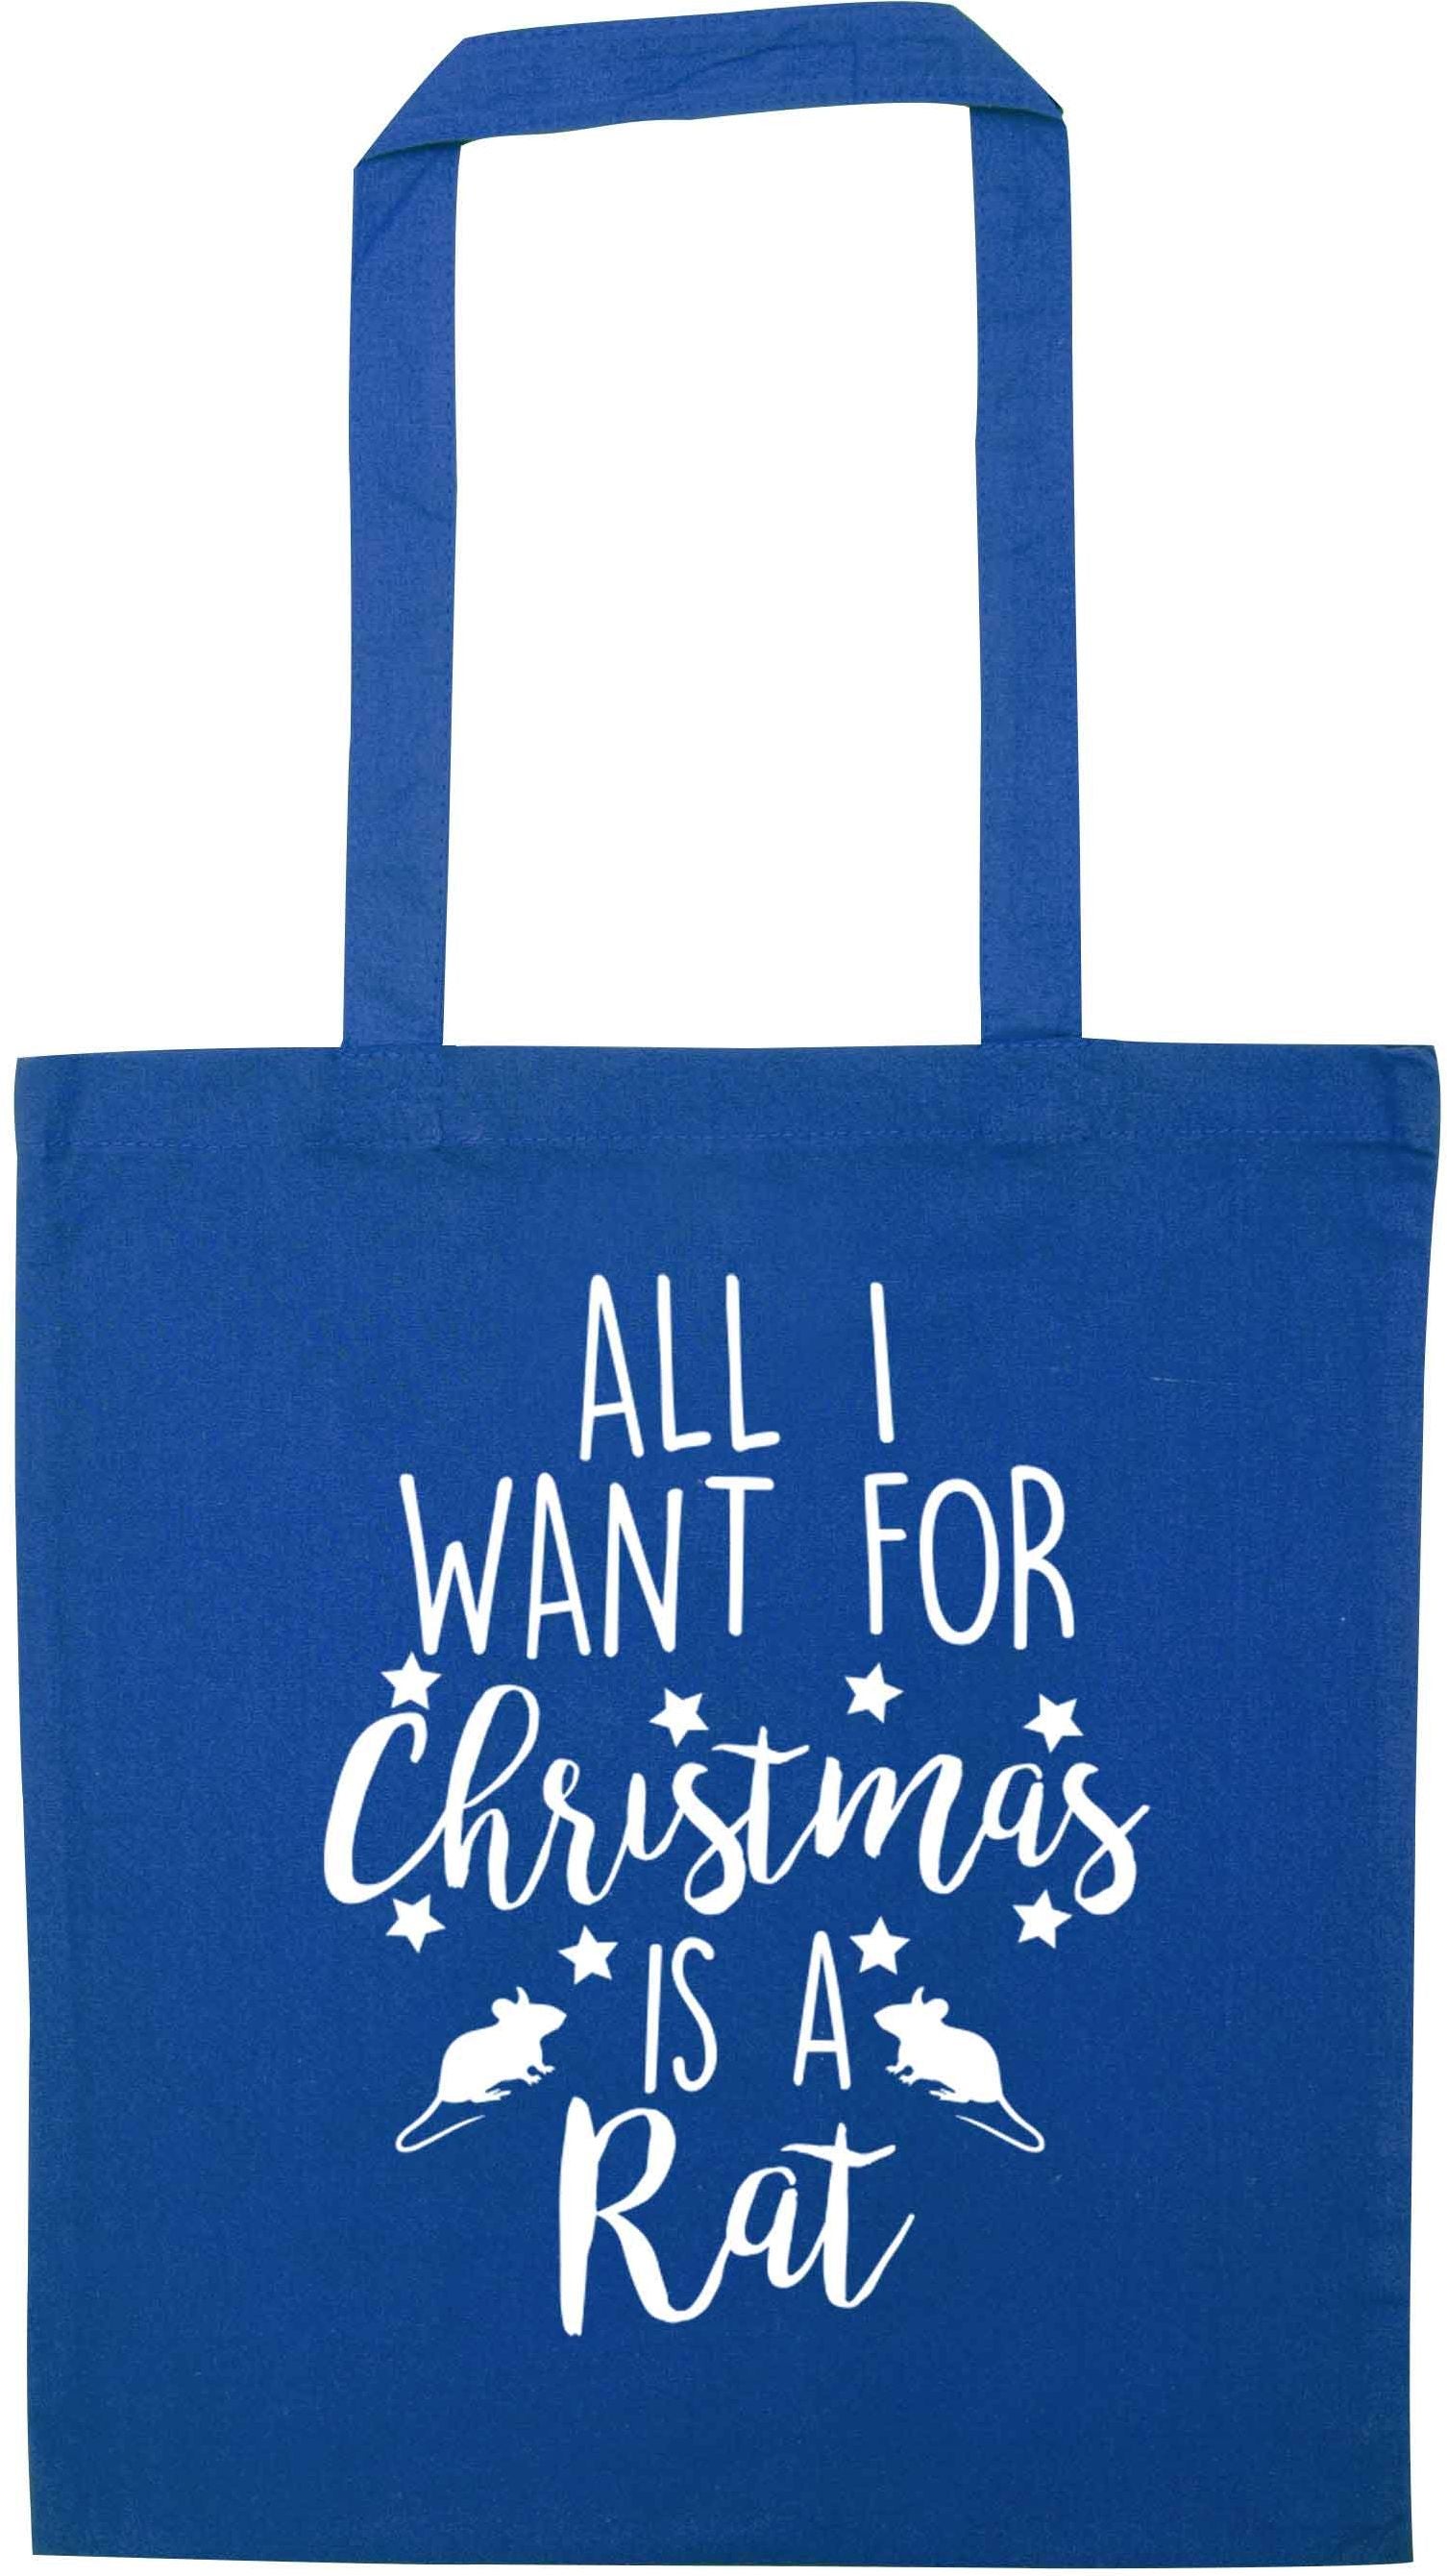 All I want for Christmas is a rat blue tote bag